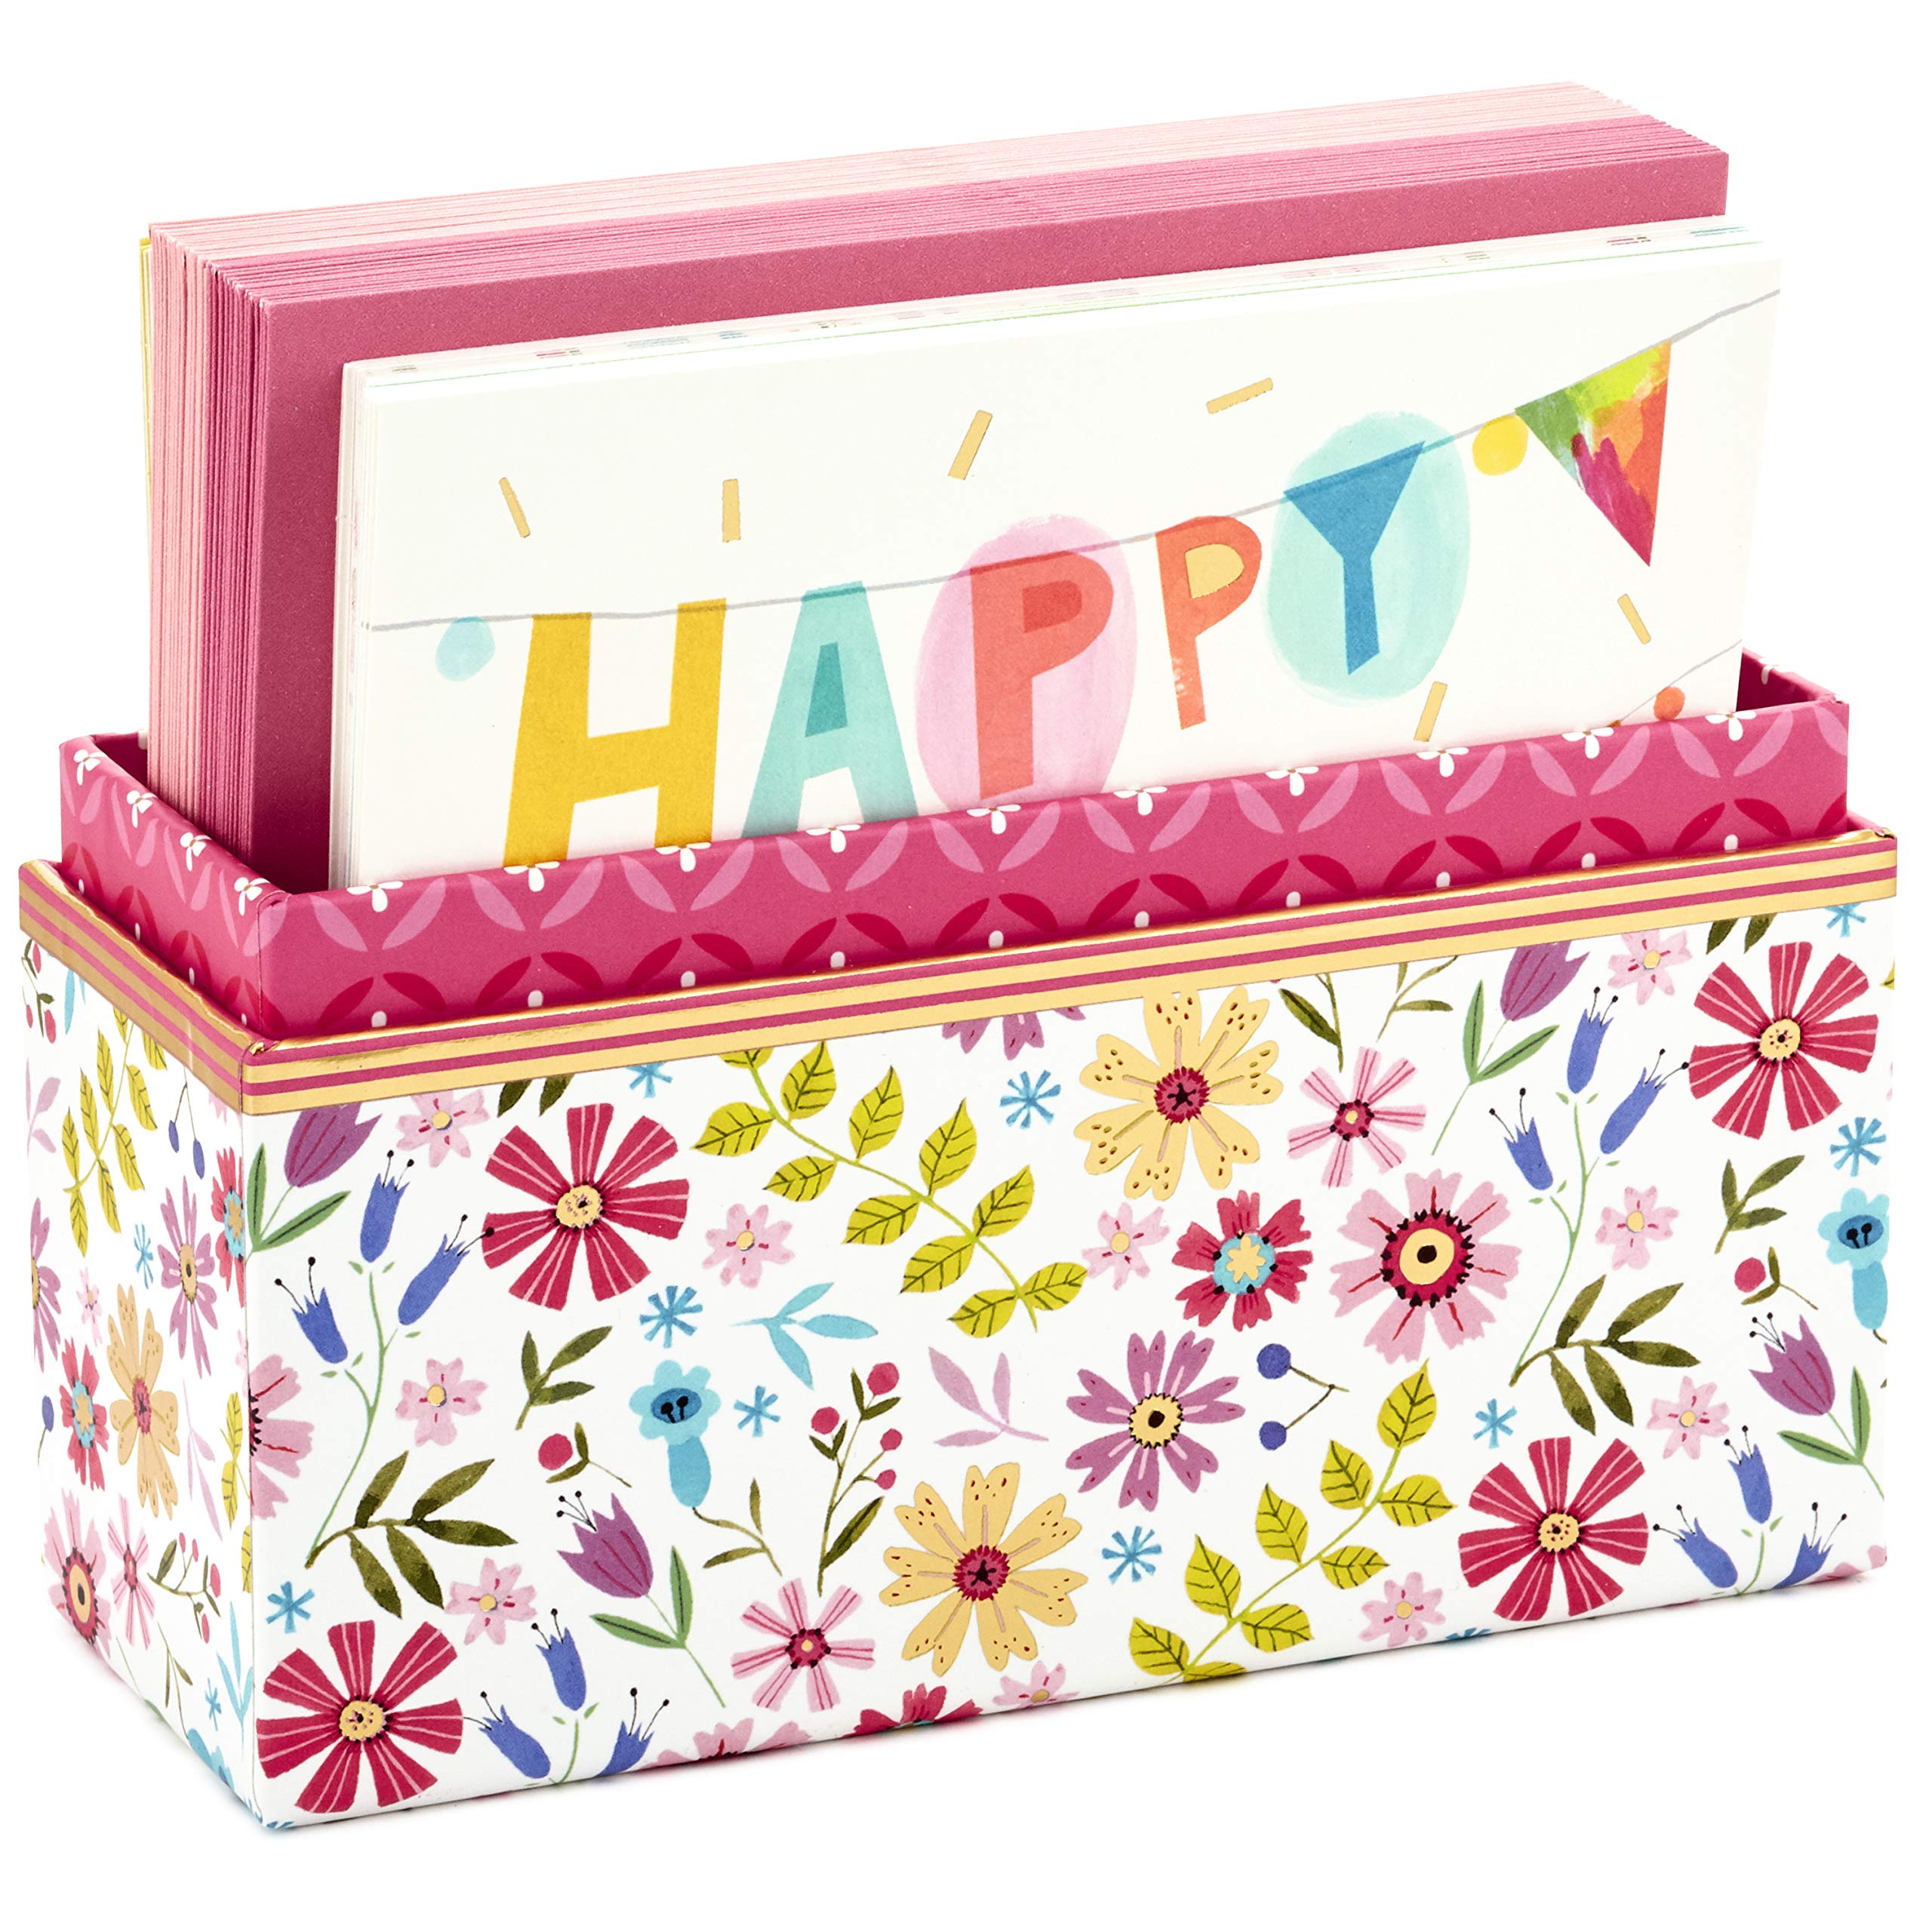 Hallmark Pack of 30 Assorted Boxed Greeting Cards, Good Vibes—Birthday Cards, Thinking of You Cards, Thank You Cards, Blank Cards (5STZ1034)